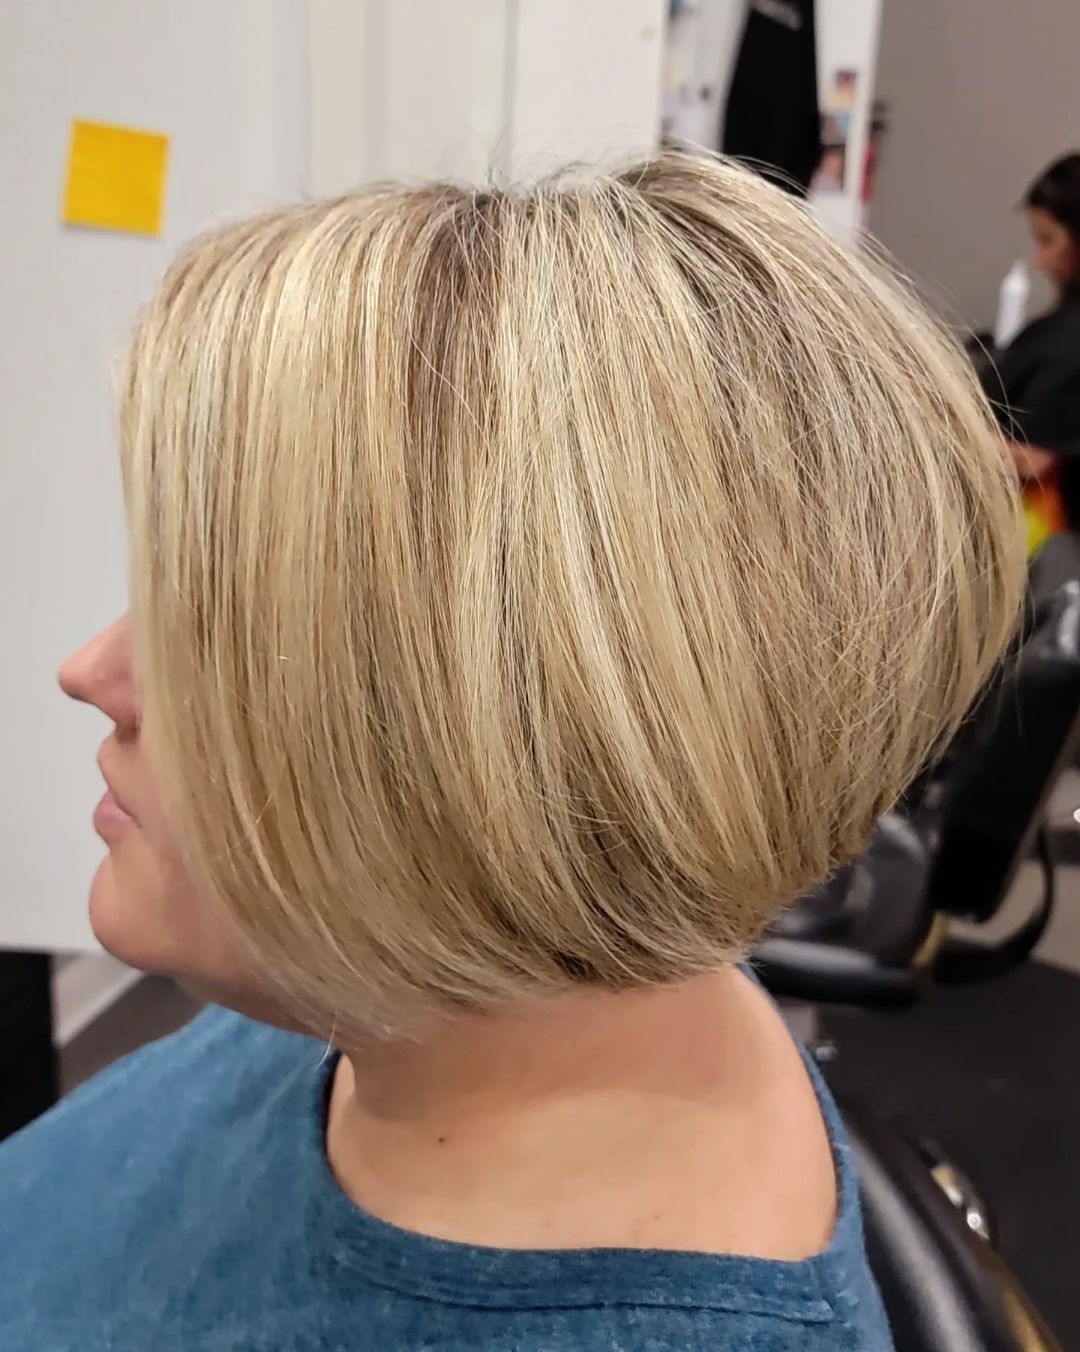 Stacked Bob 13 Long stacked bob | Medium length stacked bob | Pictures of stacked bob haircuts front and back Stacked Bob Hairstyles for Women